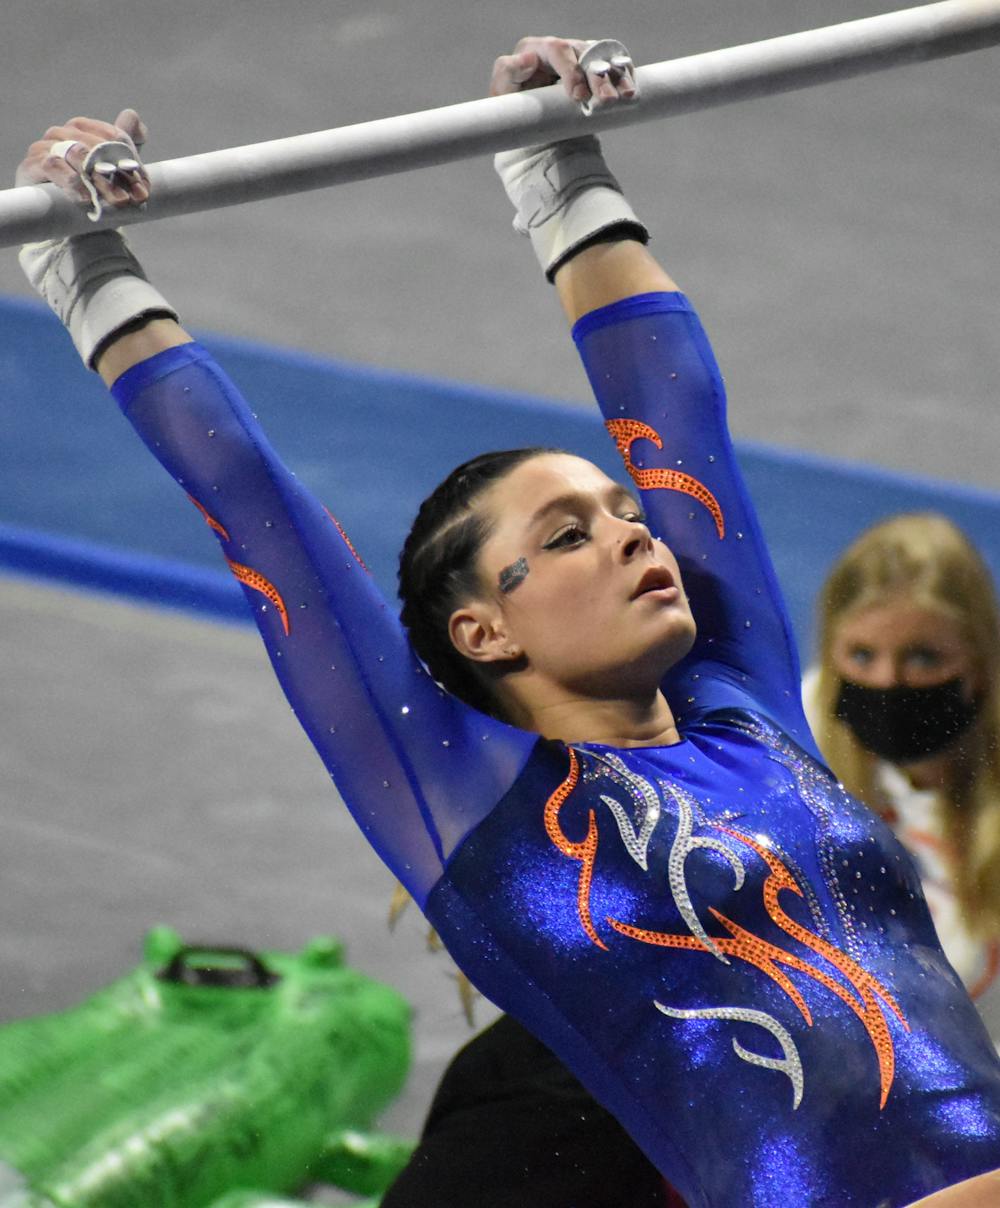 Florida recorded a season-low 48.725 on the bars. Photo from UF-Mizzou Jan. 29.